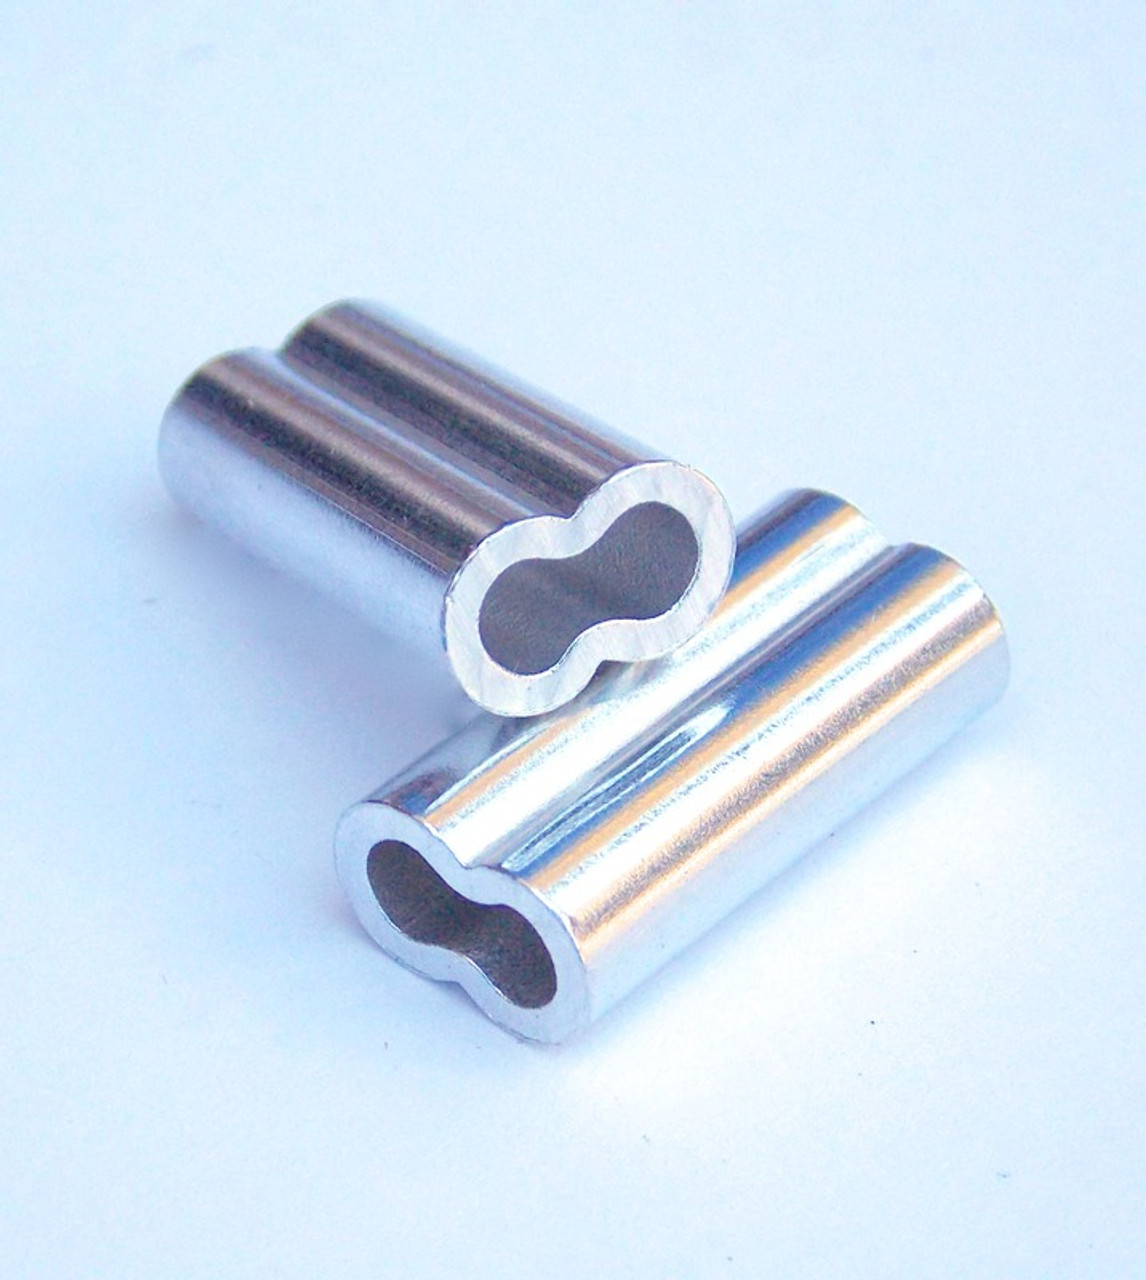 Aluminum Crimp Sleeve Double Barrel available in 1.5mm-4.2mm